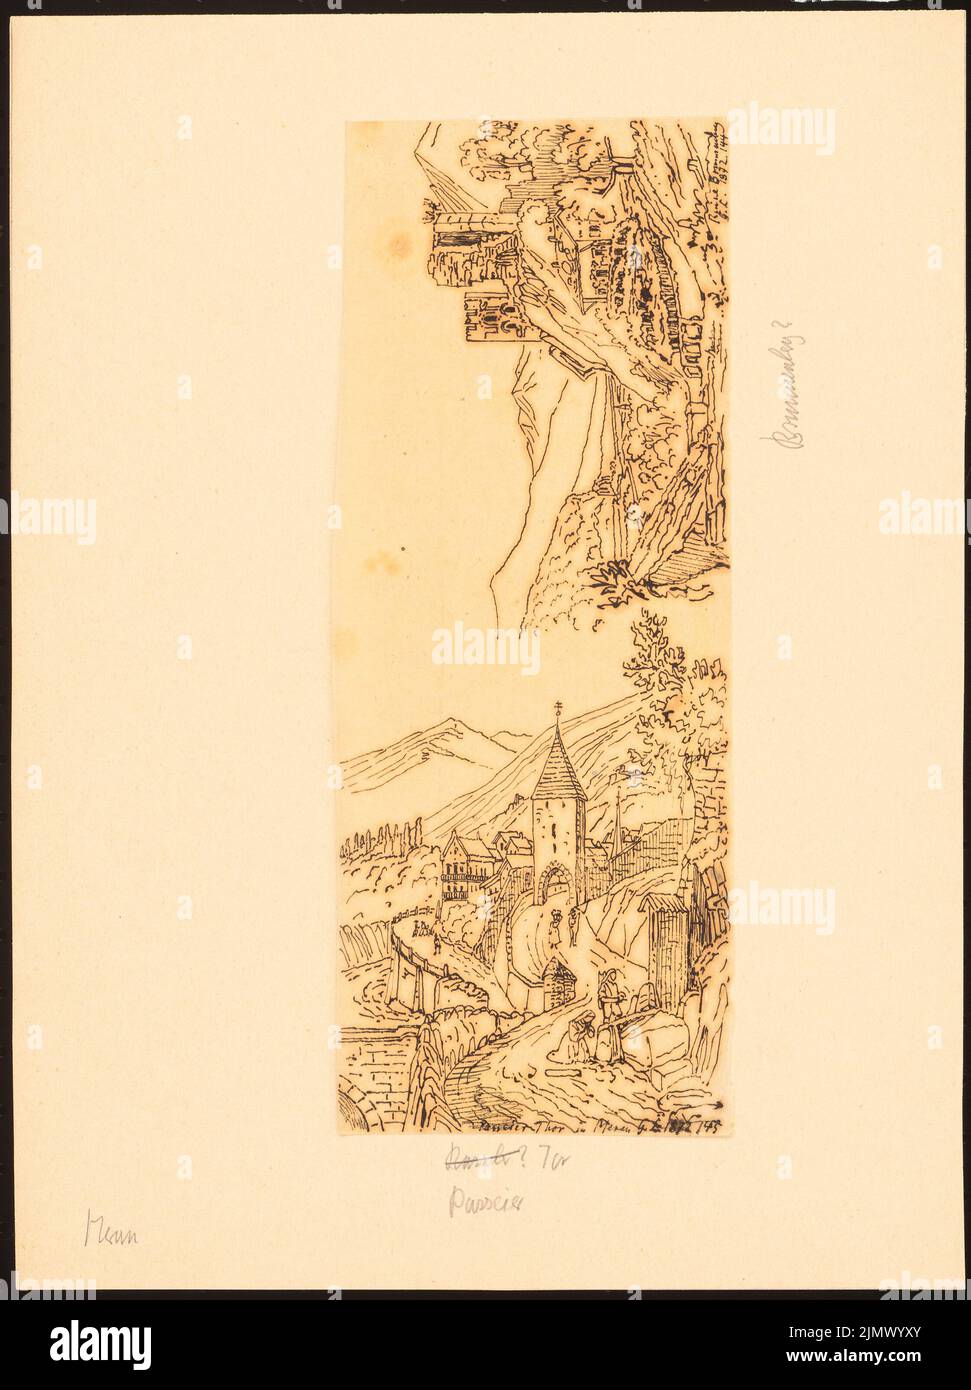 Quast Ferdinand von (1807-1877), Passeirer/Passeier Tor and Brunnenburg/Brunnenberg near Merano (1872): Two through drawings: Perspective view of the city gate with the surrounding area and figure staff, view of the castle ruins, 1872, p.. Ink on transparent, 31 x 23.2 cm (including scan edges) Quast Ferdinand von  (1807-1877): Passeirer Tor und Brunnenburg, Meran Stock Photo